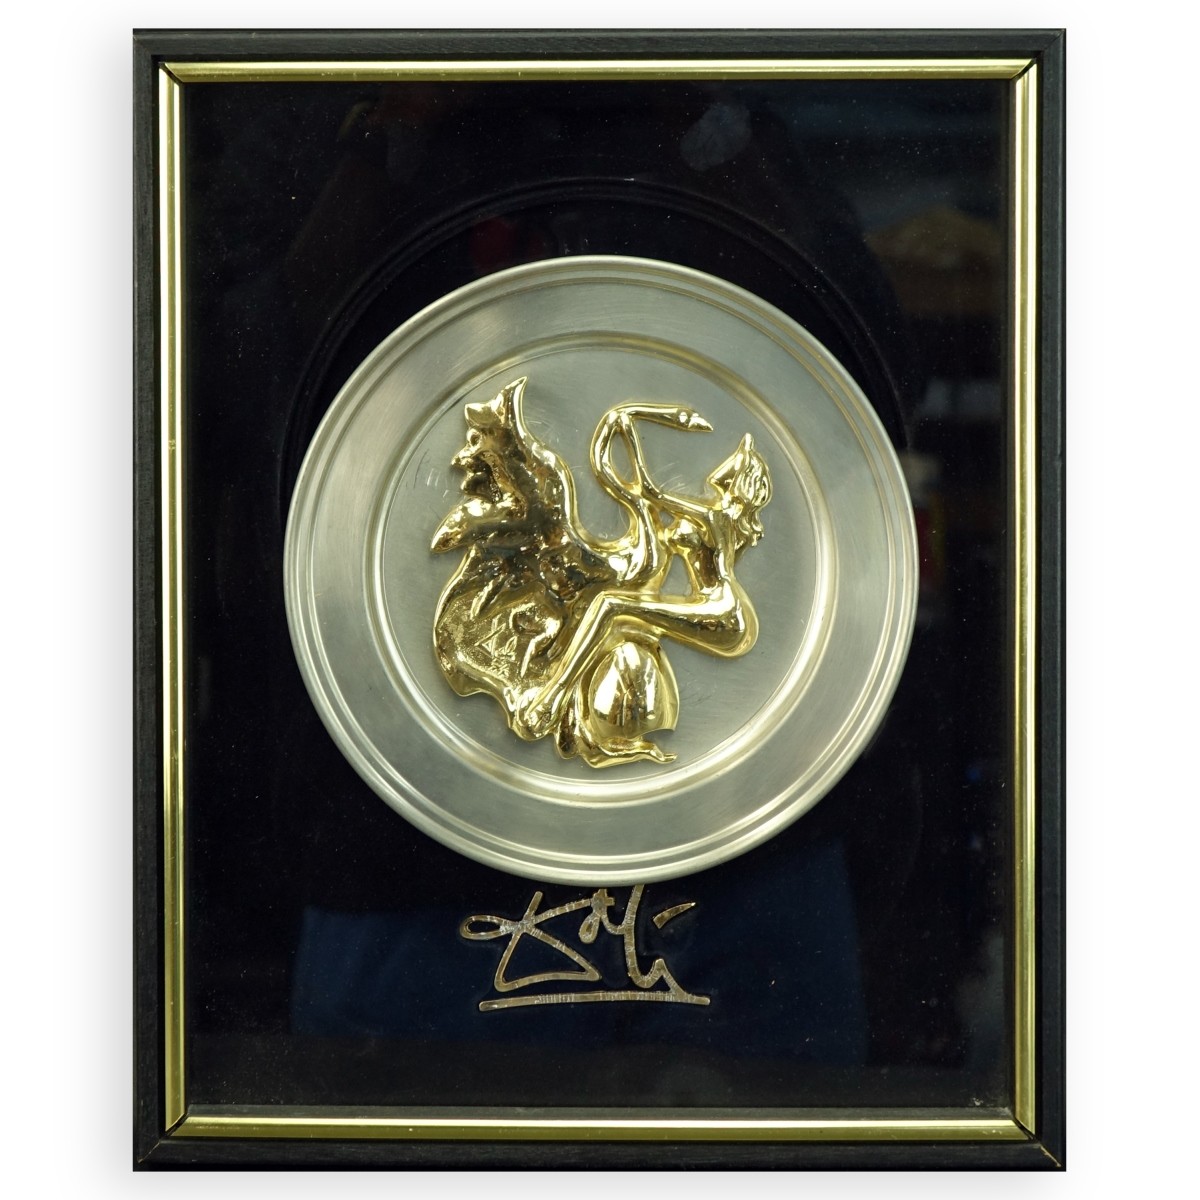 Dali (1904-1989) Leda and the Swan Pewter Plate